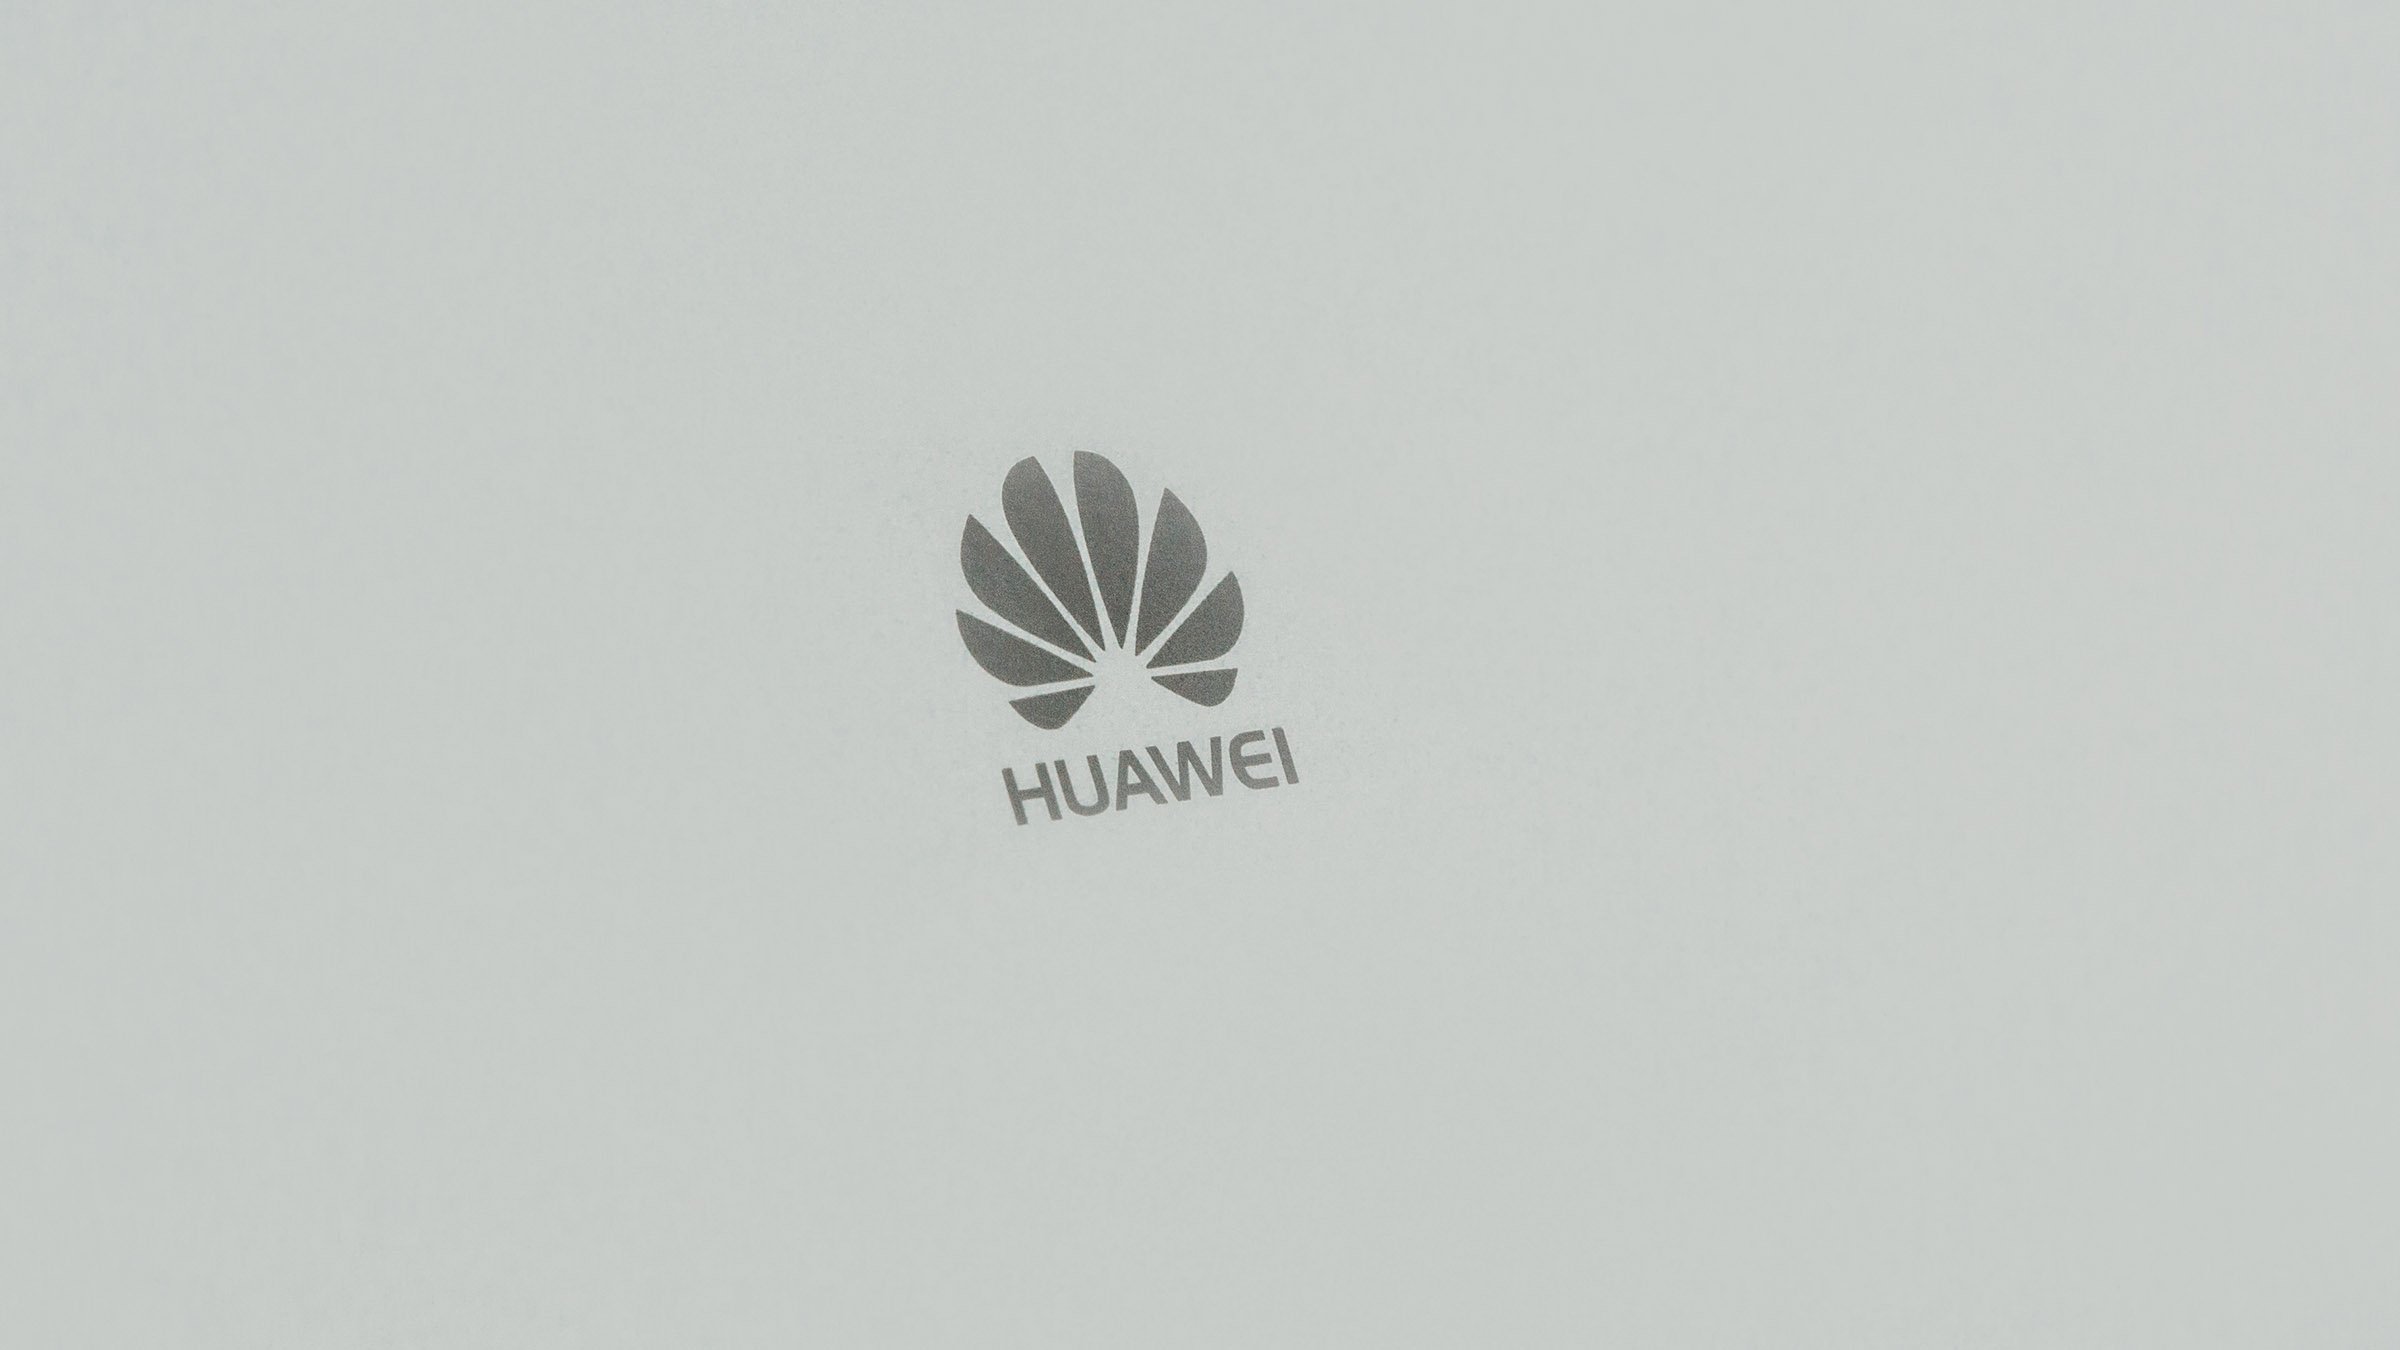 Huawei expected to unveil multiple devices at IFA